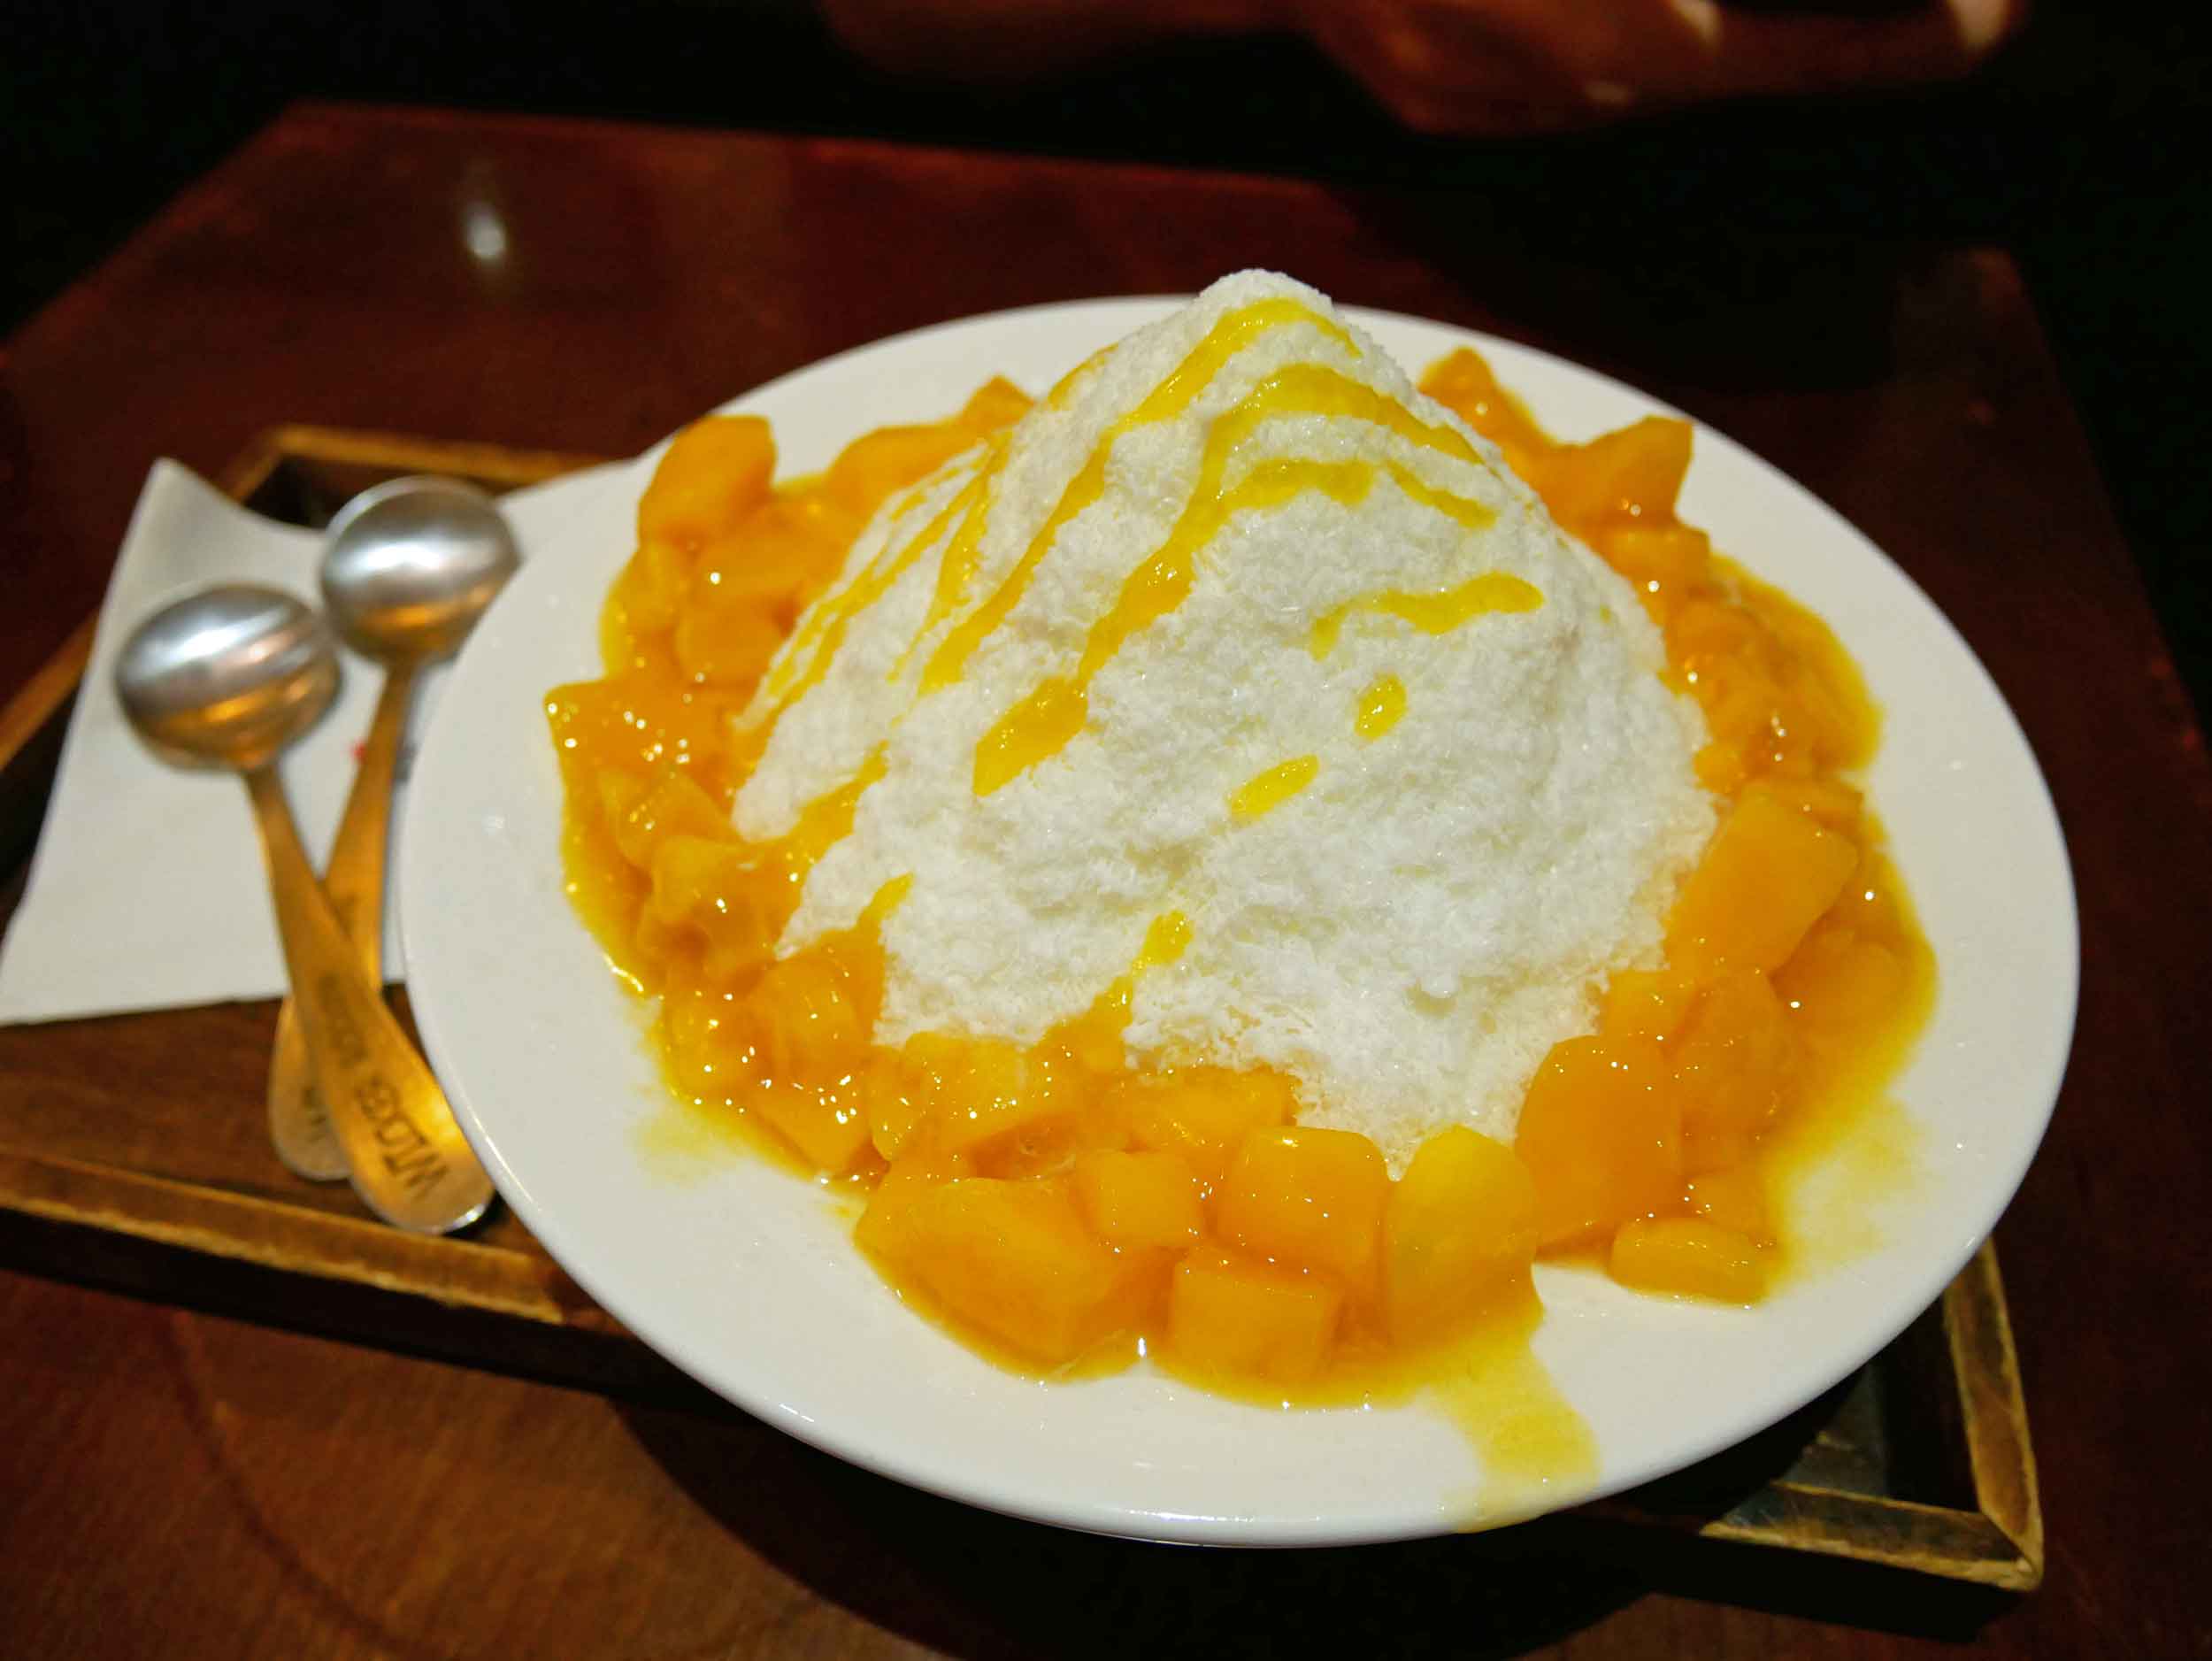  But really, we snuck in a big bowl of traditional Korean mango shaved ice before hitting the sack!&nbsp; 